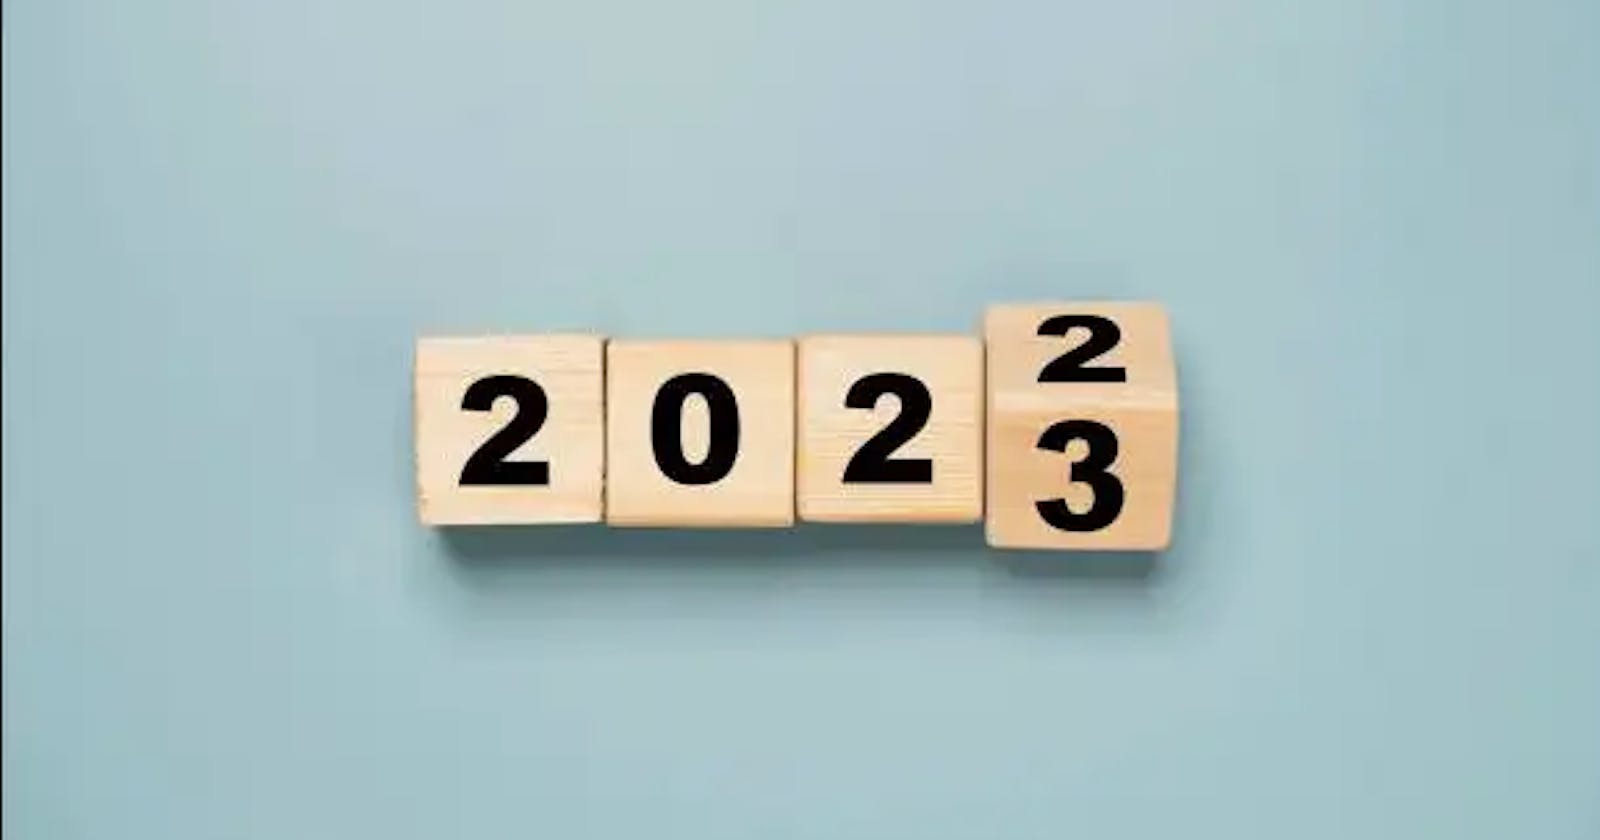 From 2022 to 2023